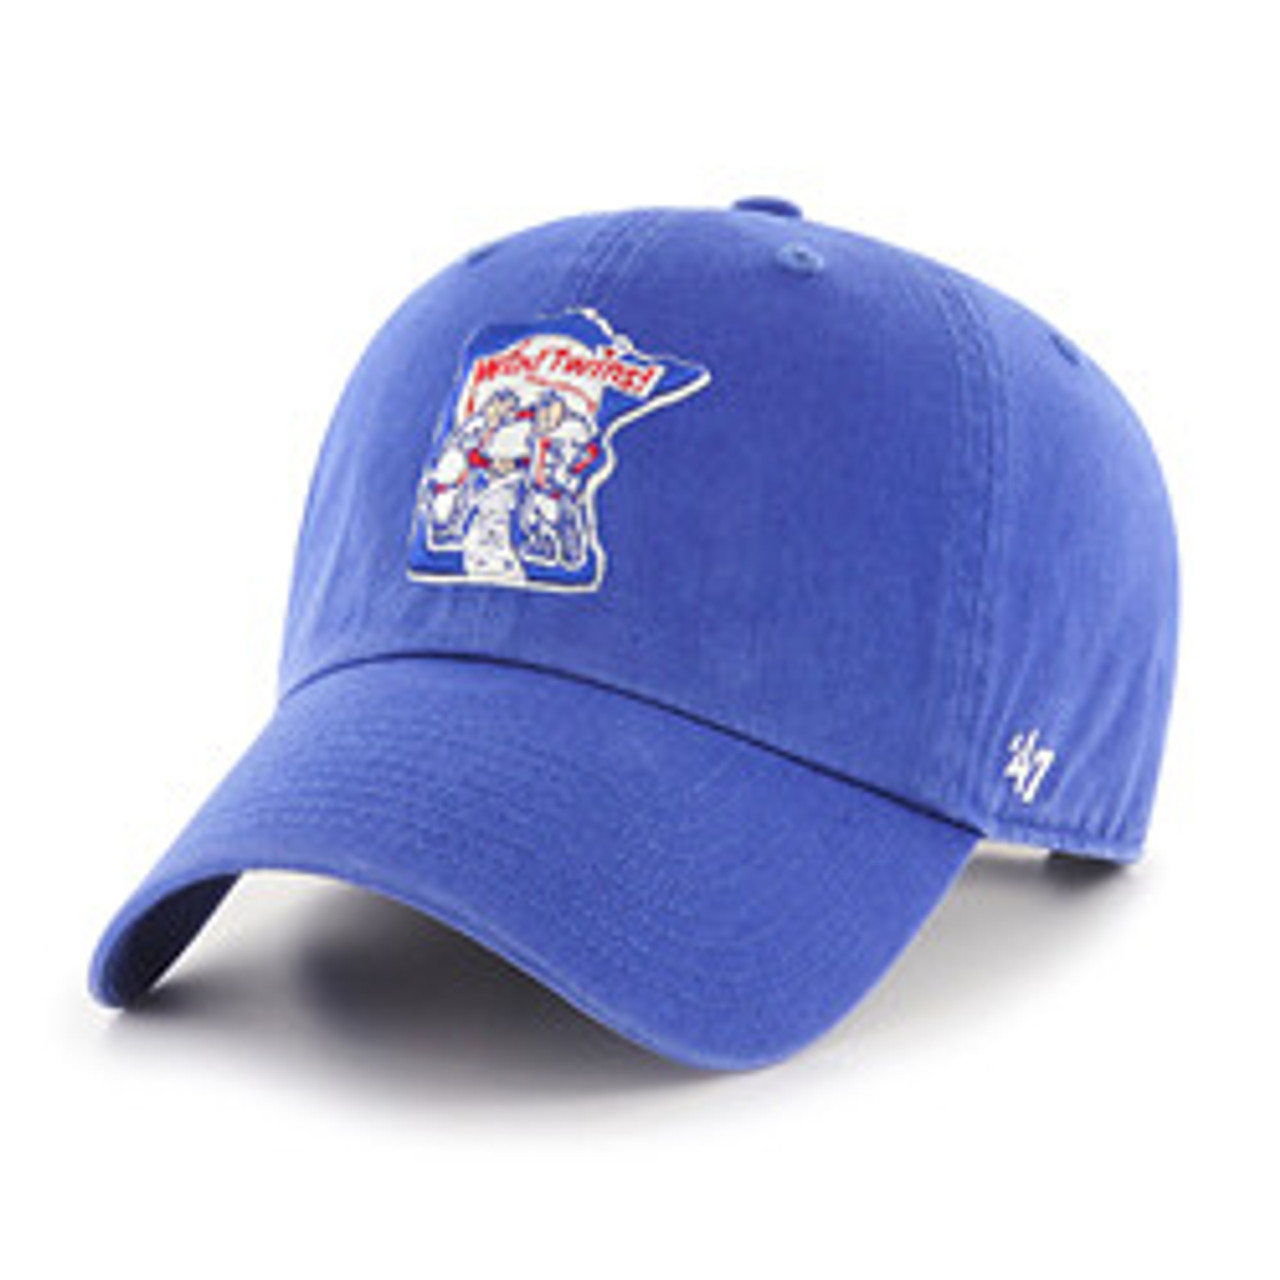 Does the clubhouse store have hats in stock? : r/minnesotatwins